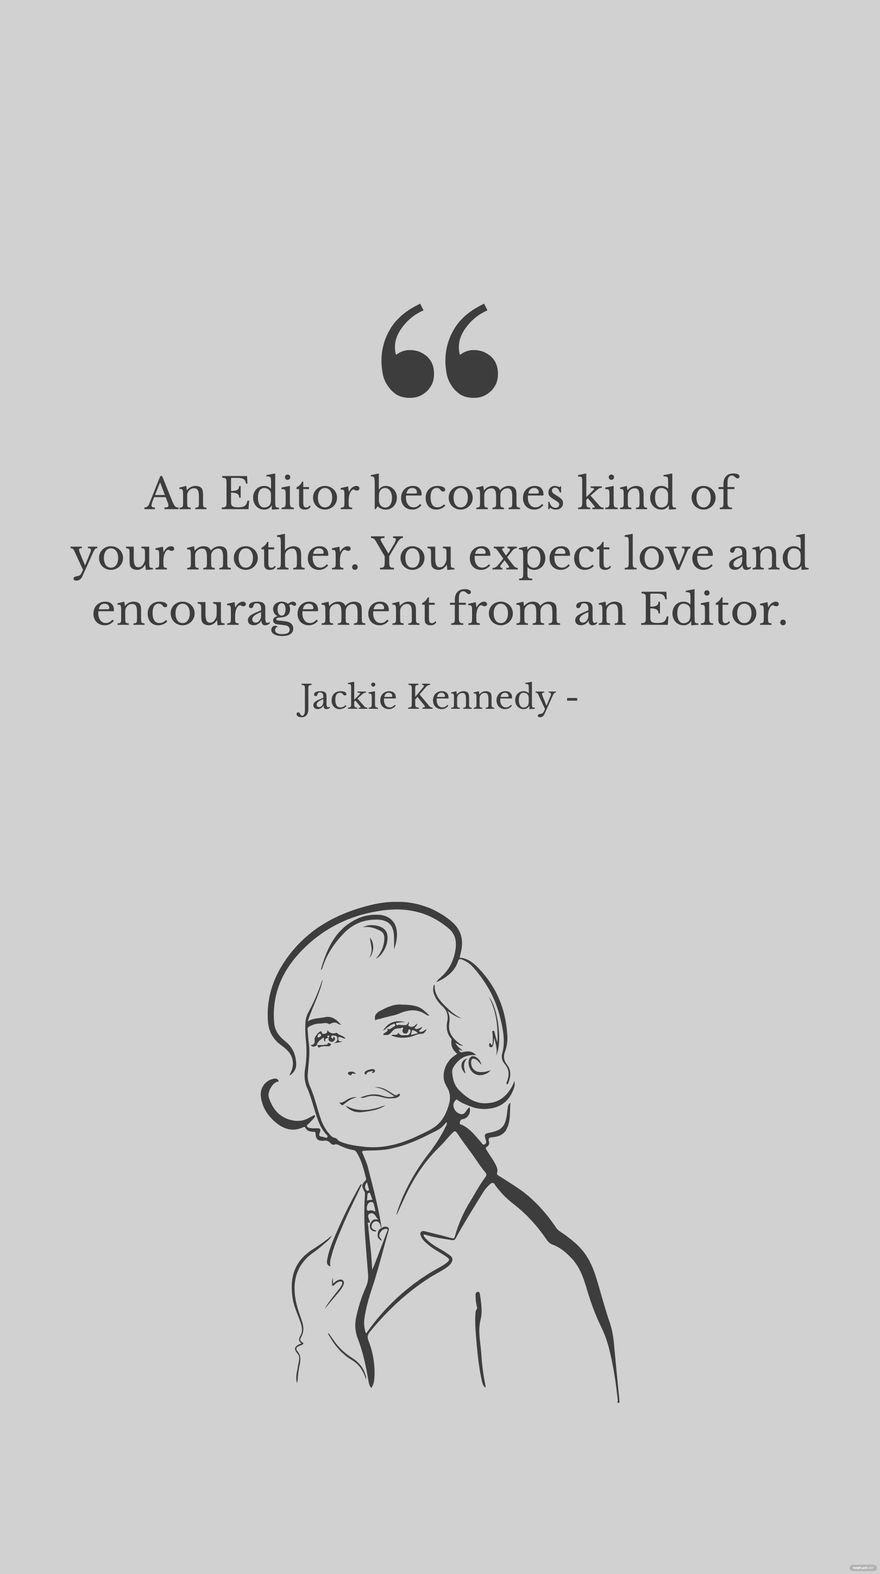 Jackie Kennedy - An Editor becomes kind of your mother. You expect love and encouragement from an Editor.